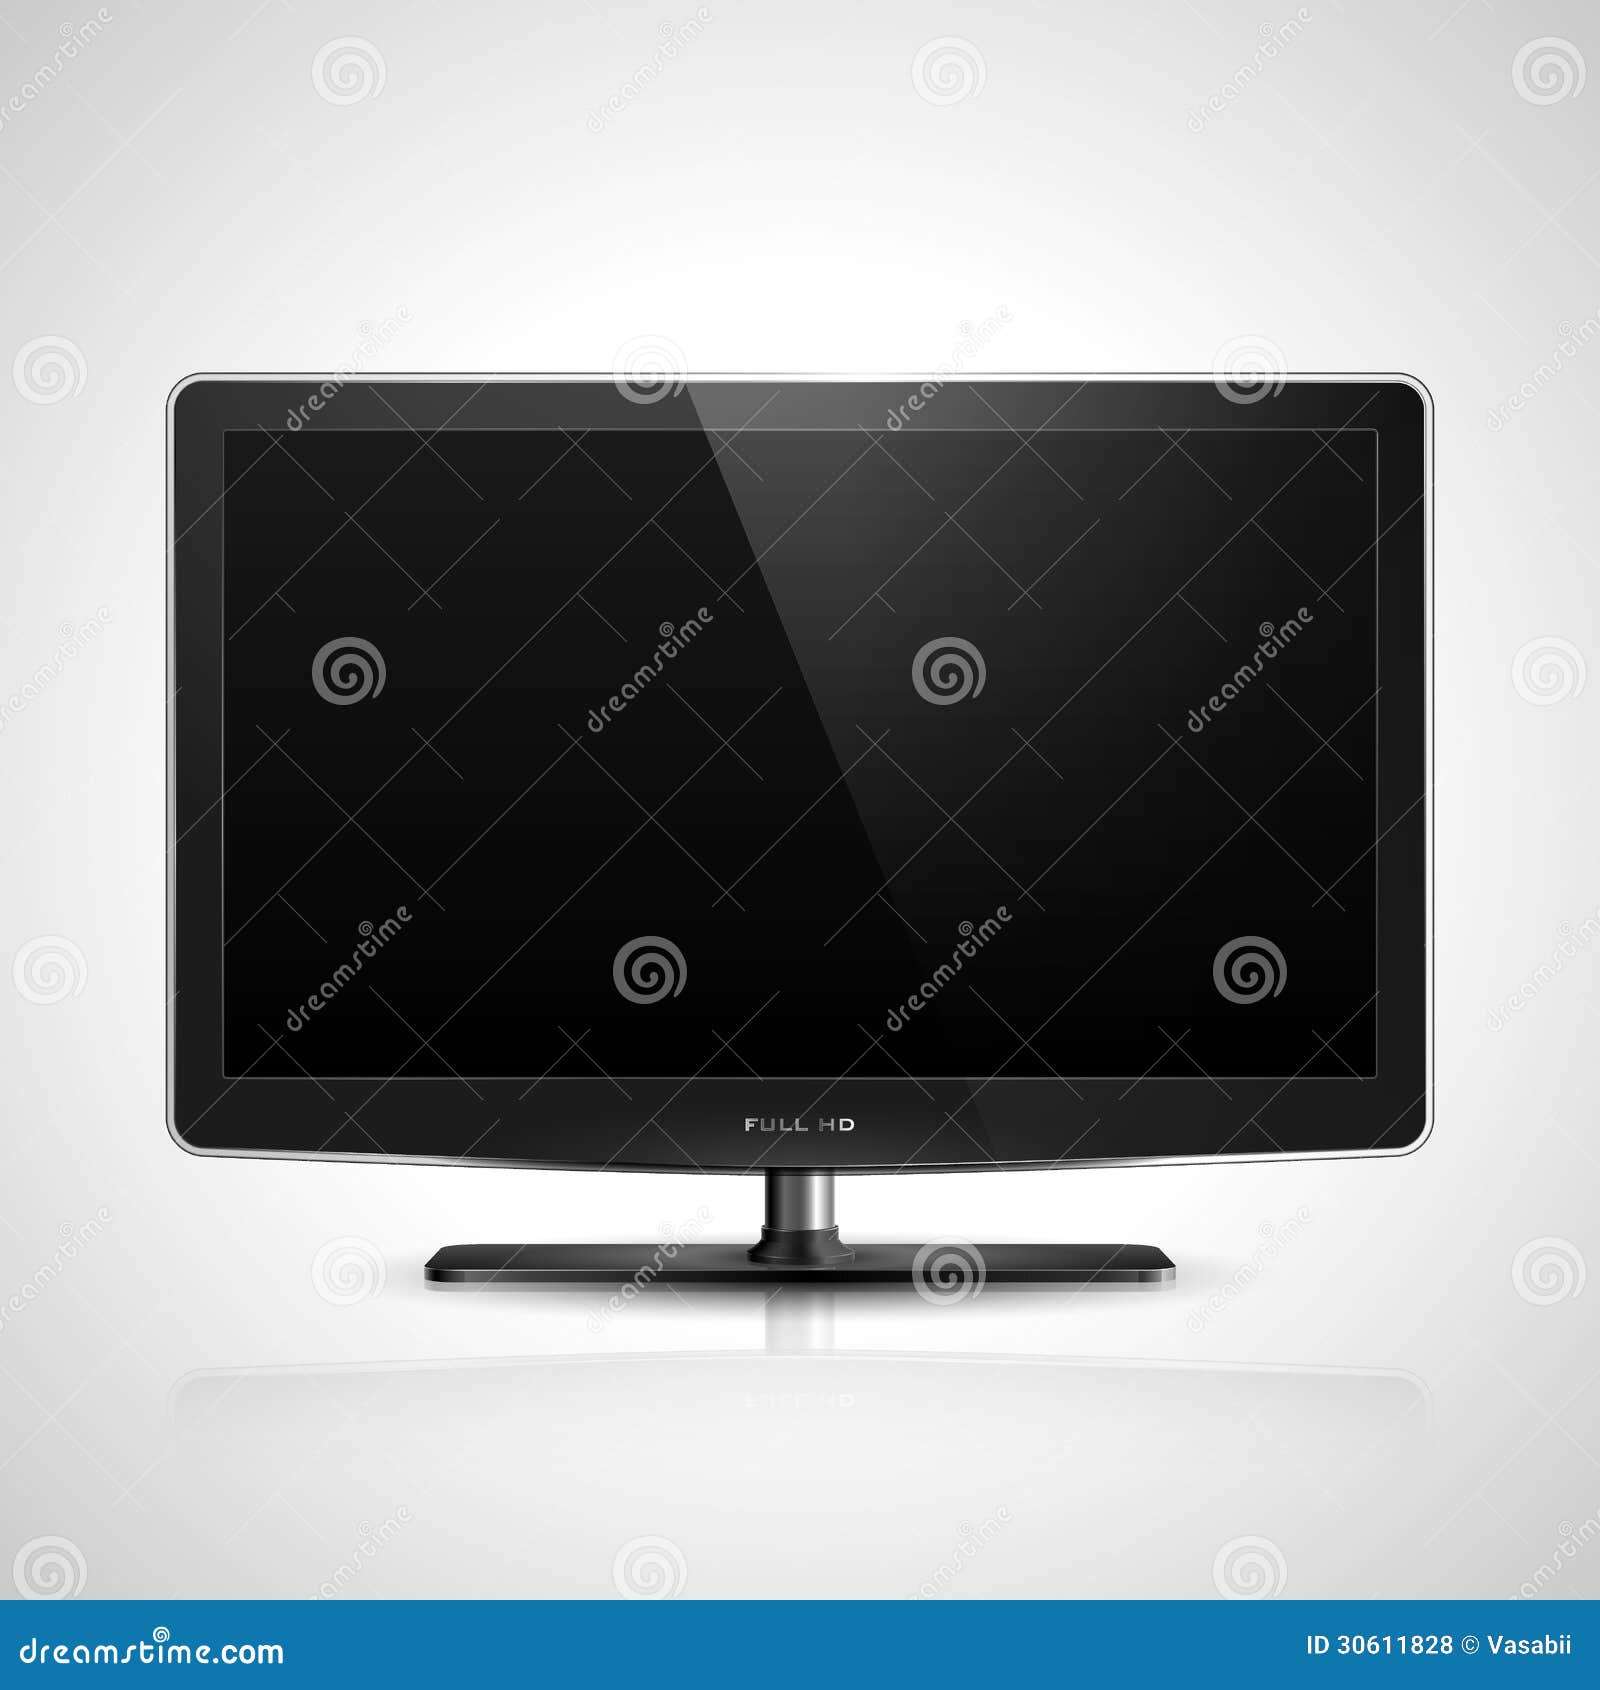 HD TV stock vector. Illustration of dimensional, large - 30611828